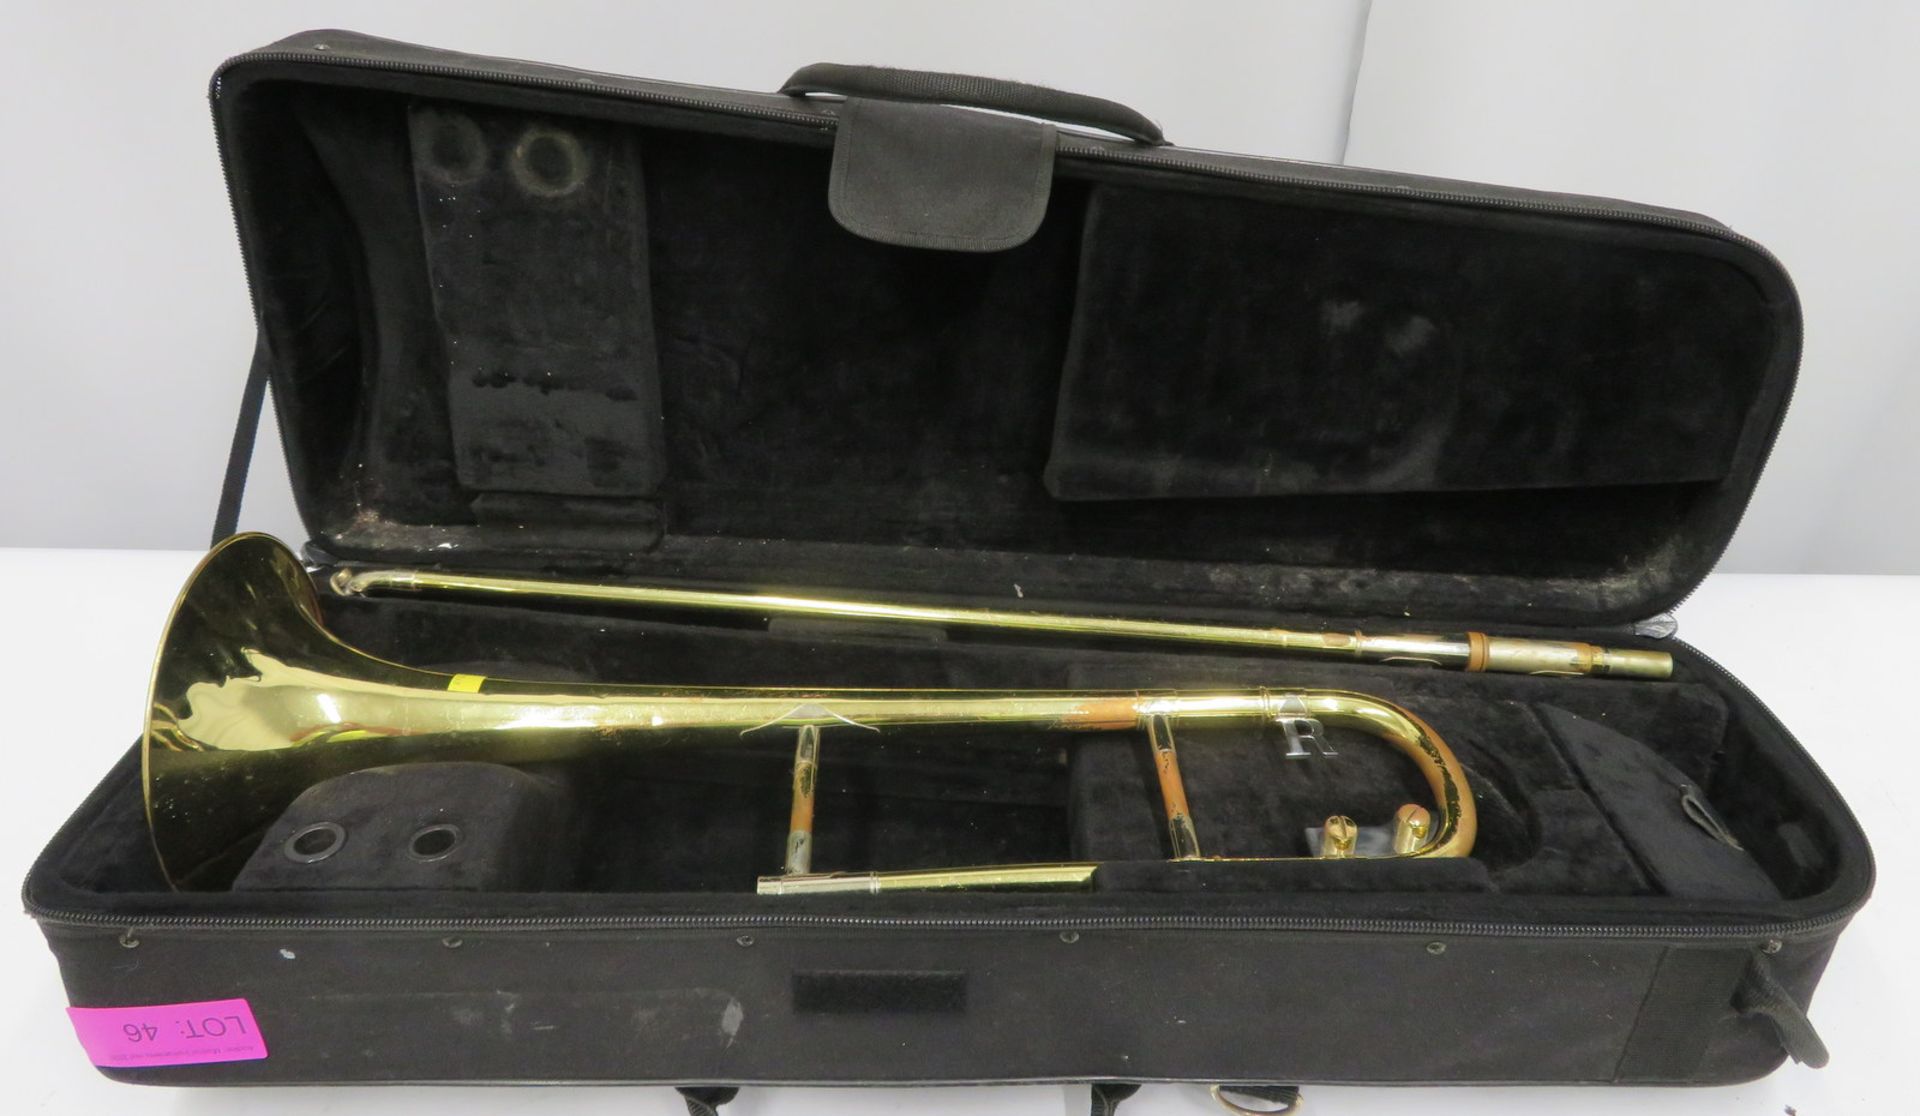 Rath R4 trombone with case. Serial number: R4140.